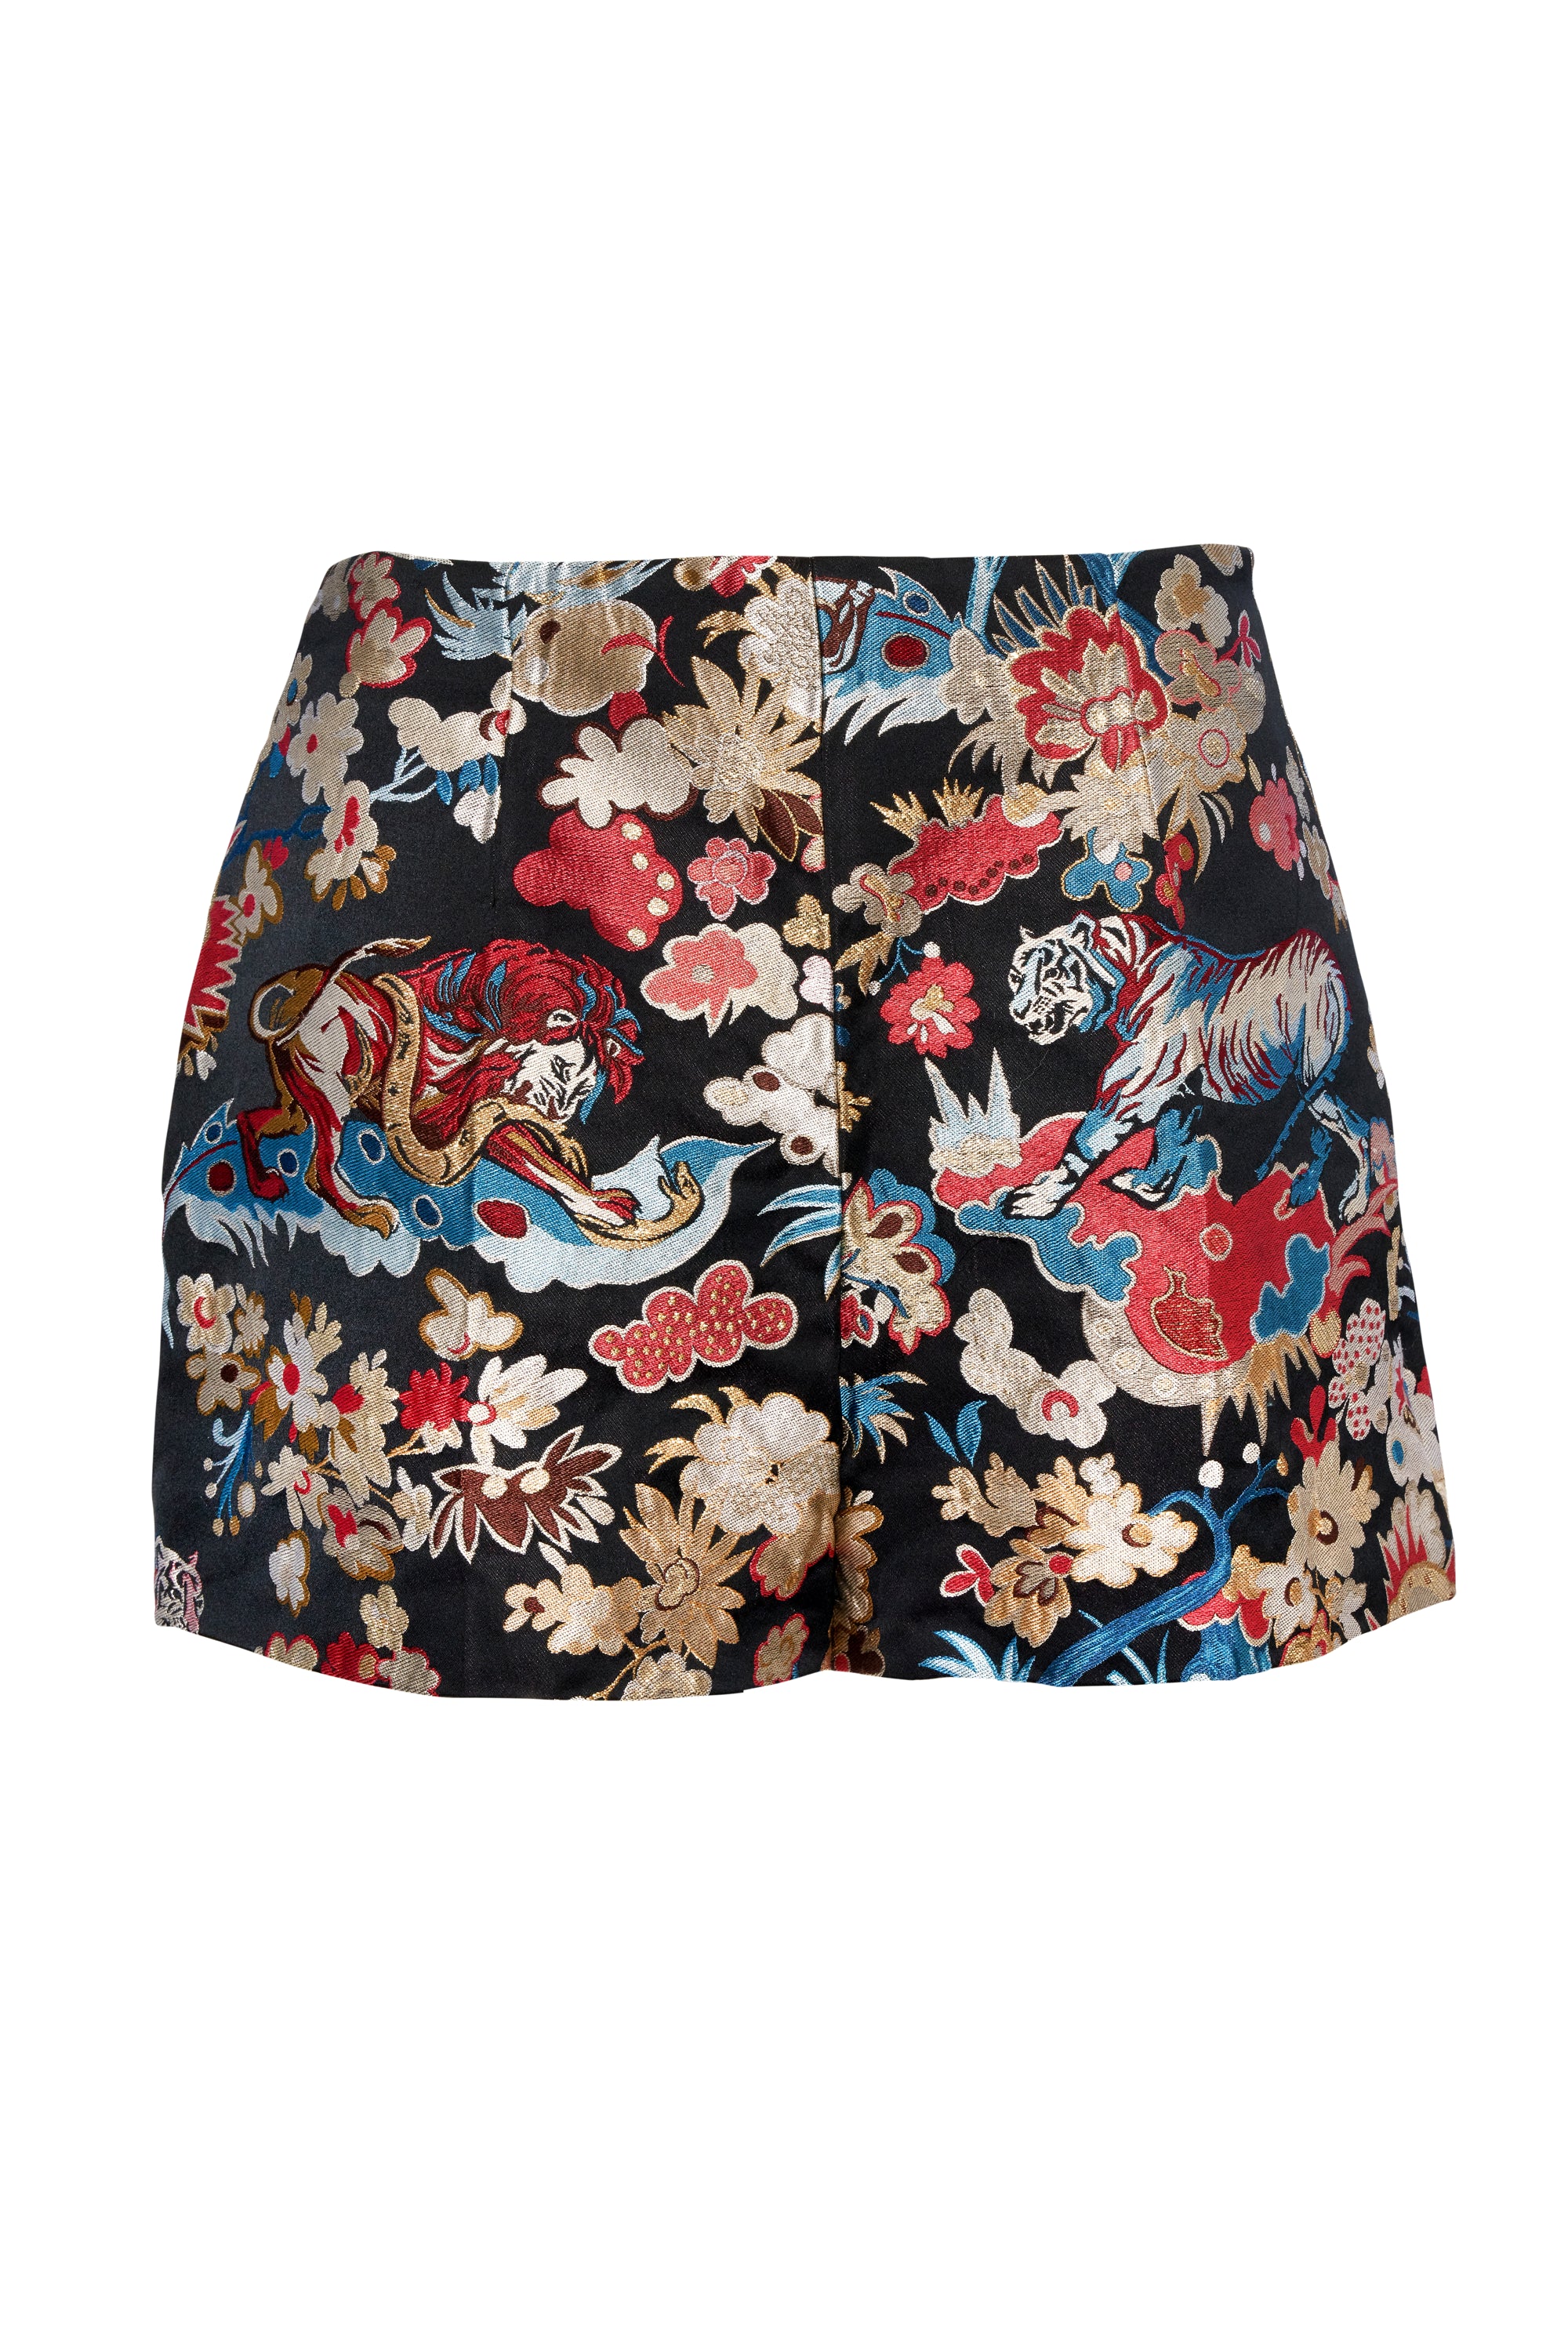 Christian Dior Brocade Lion and Tiger Pattern Shorts